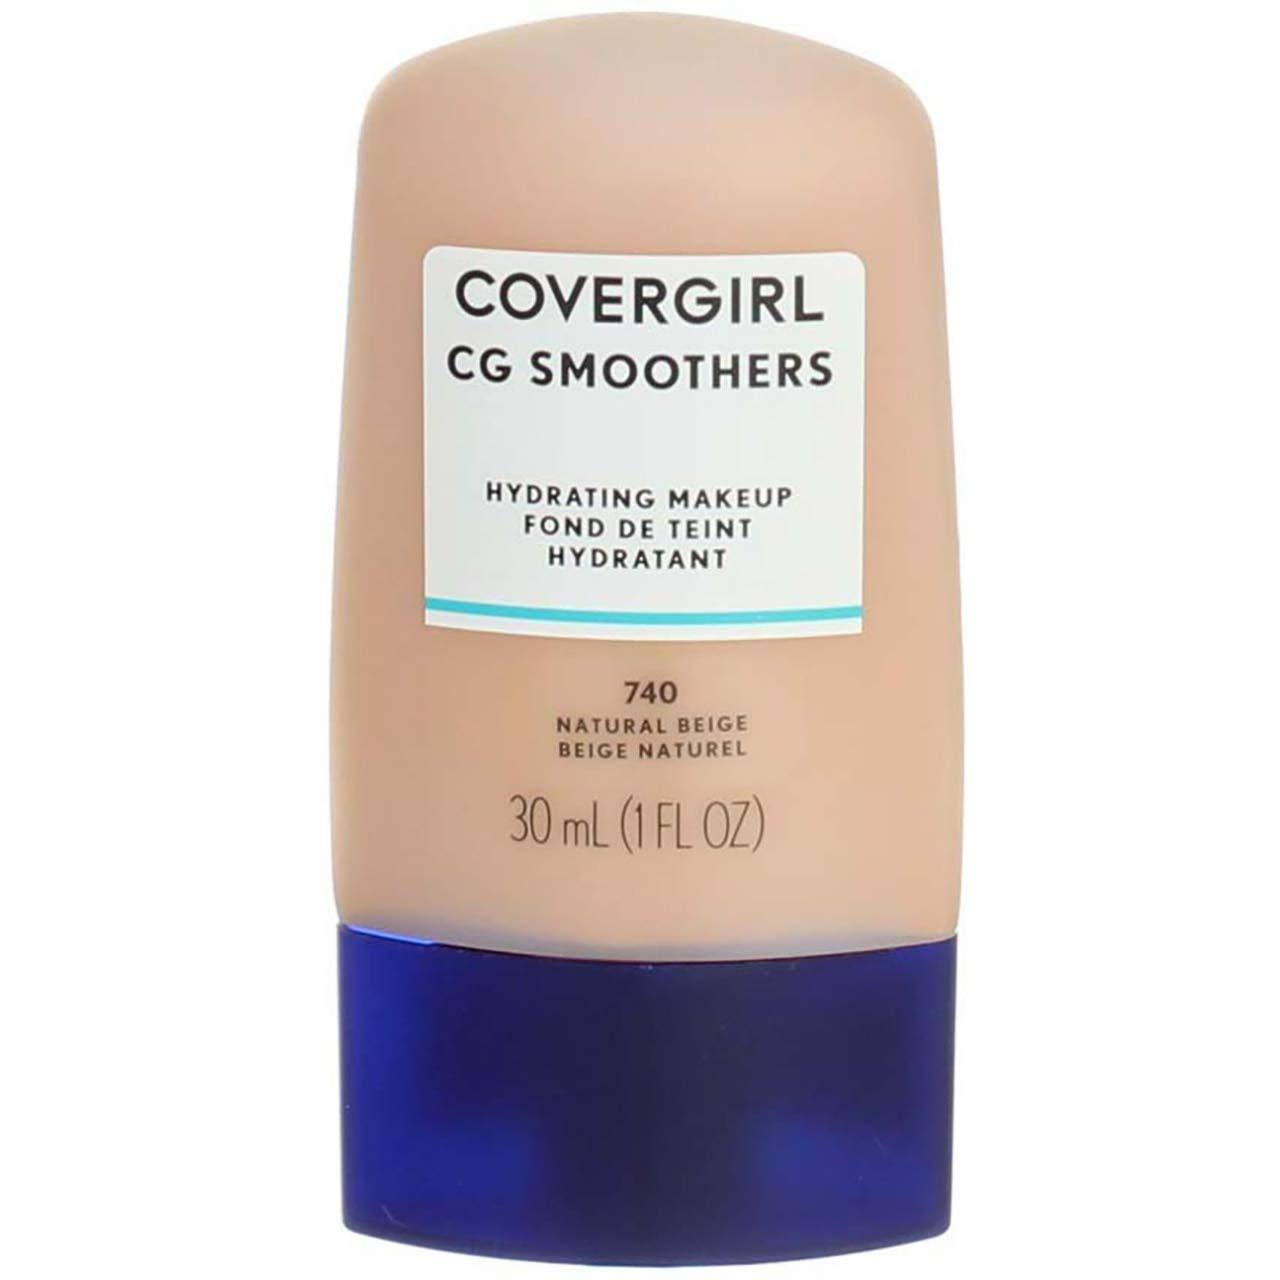 Covergirl Smoothers Hydrating Makeup 740 Natural Beige 1 fl oz (30 ml)